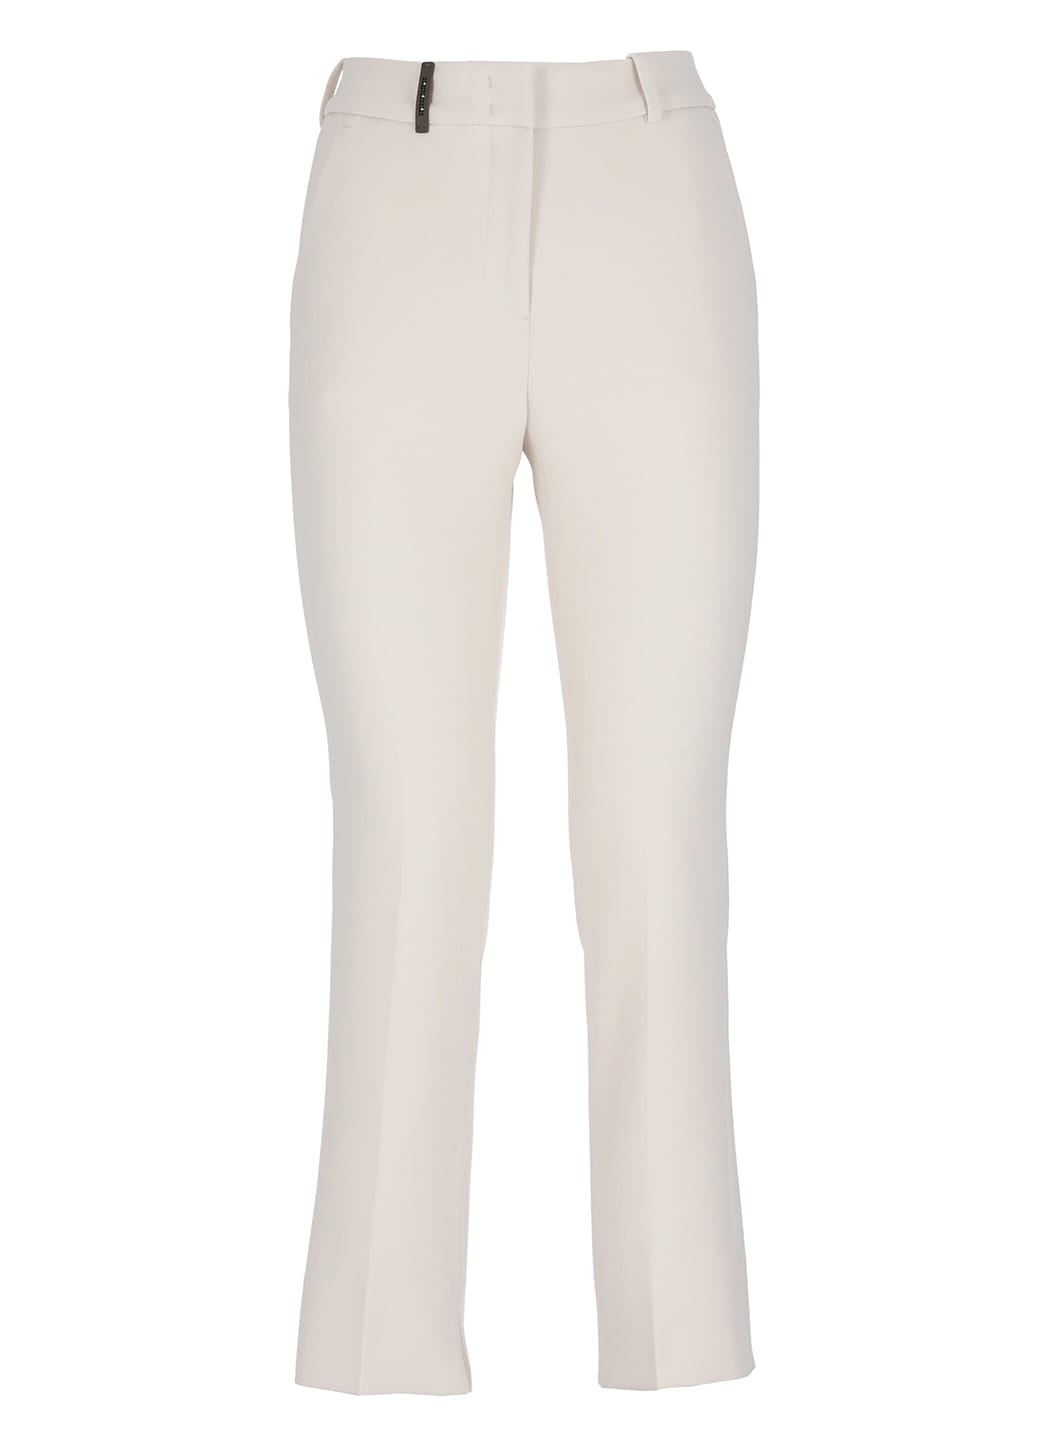 Peserico Stretch Fabric Trousers